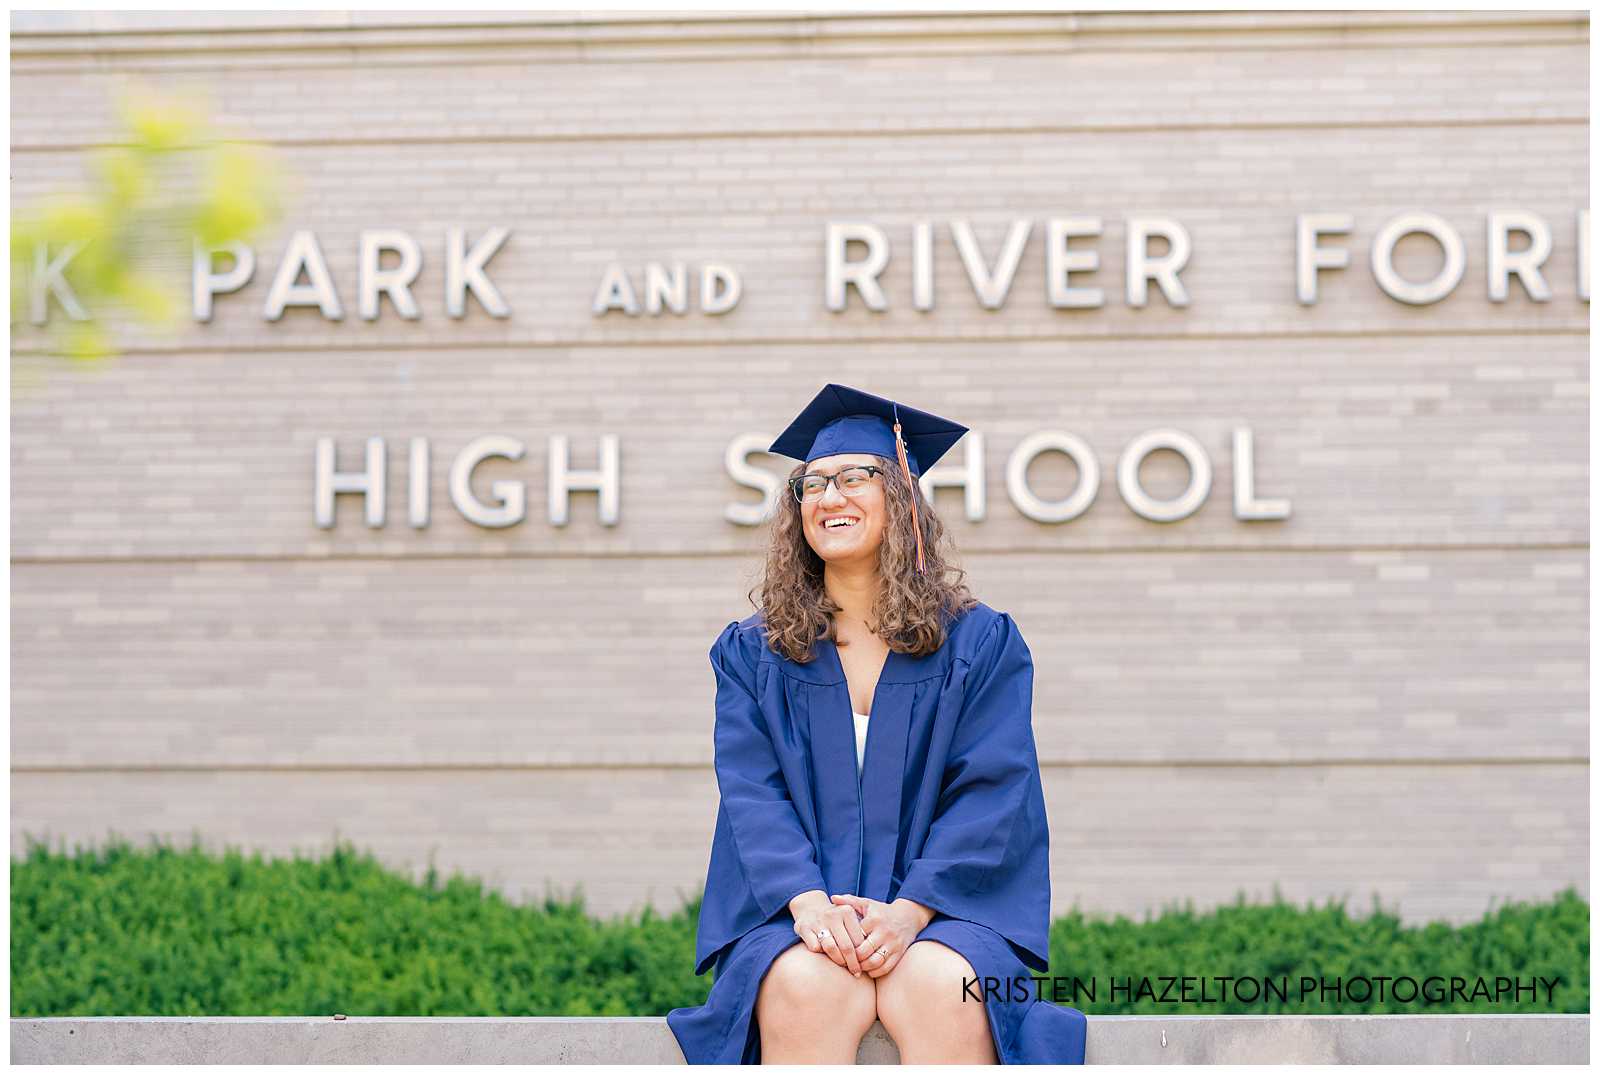 OPRFHS Senior Photos of a female graduate in front of a sign that reads Oak Park and River Forest High School